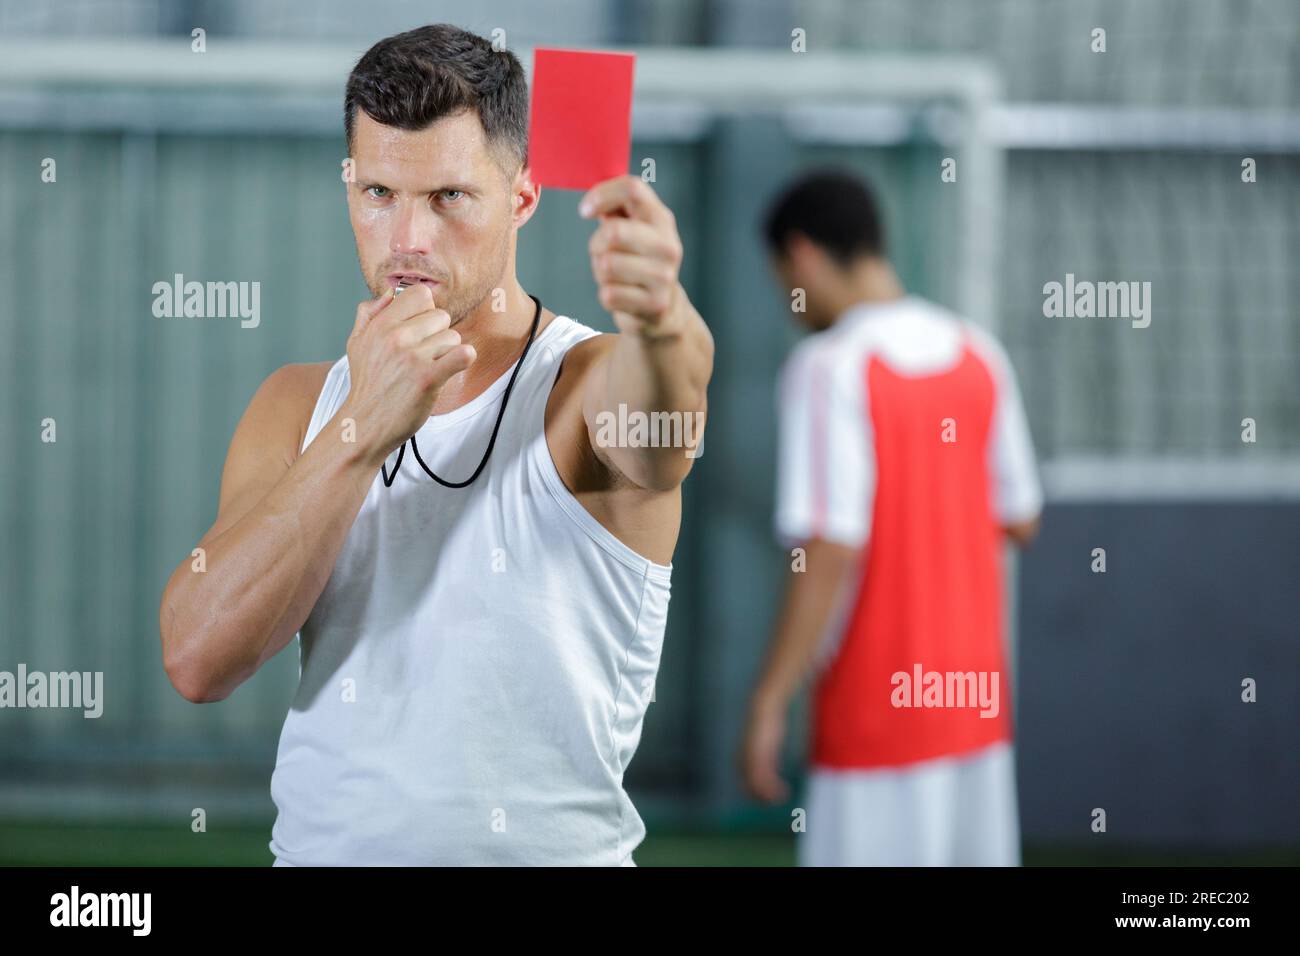 soccer referee showing red card during soccer match Stock Photo